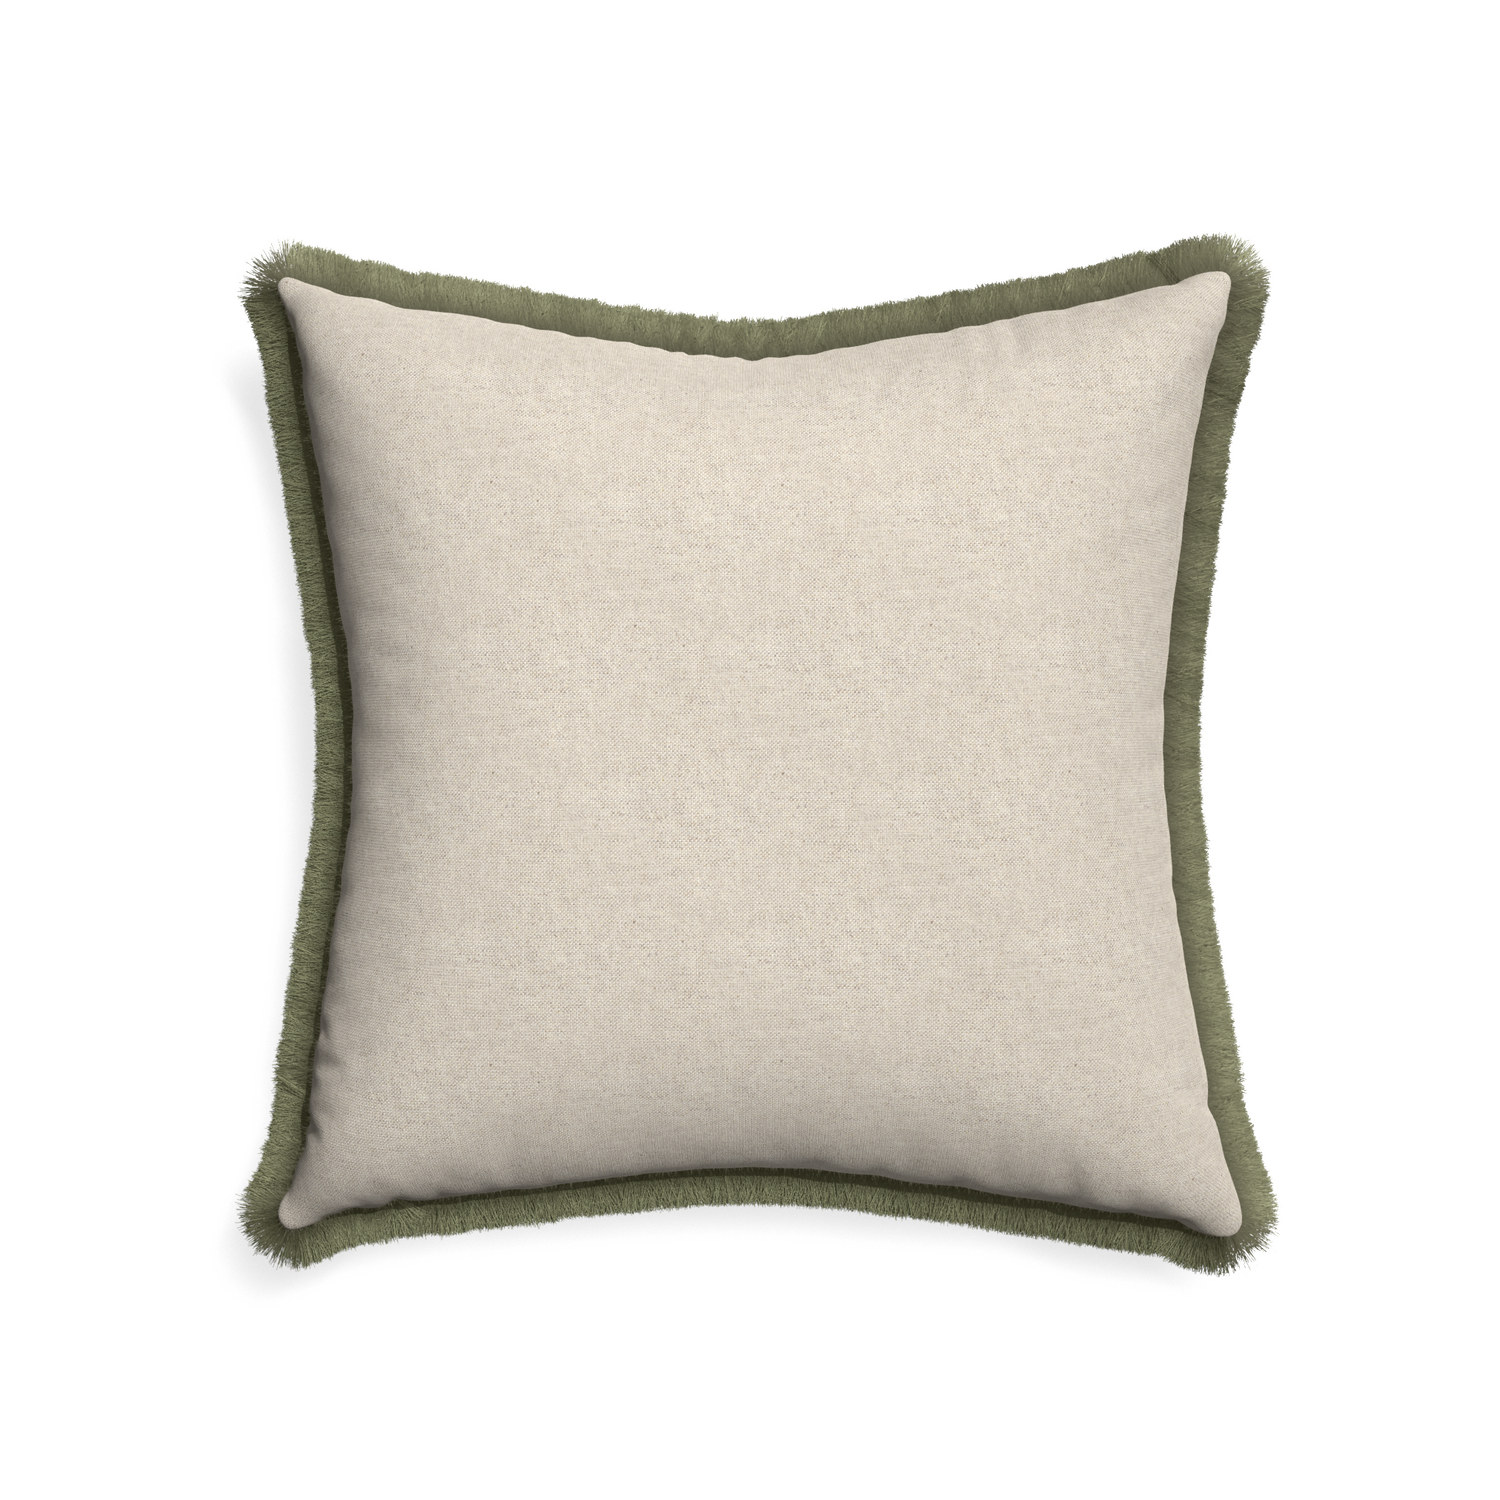 22-square oat custom light brownpillow with sage fringe on white background